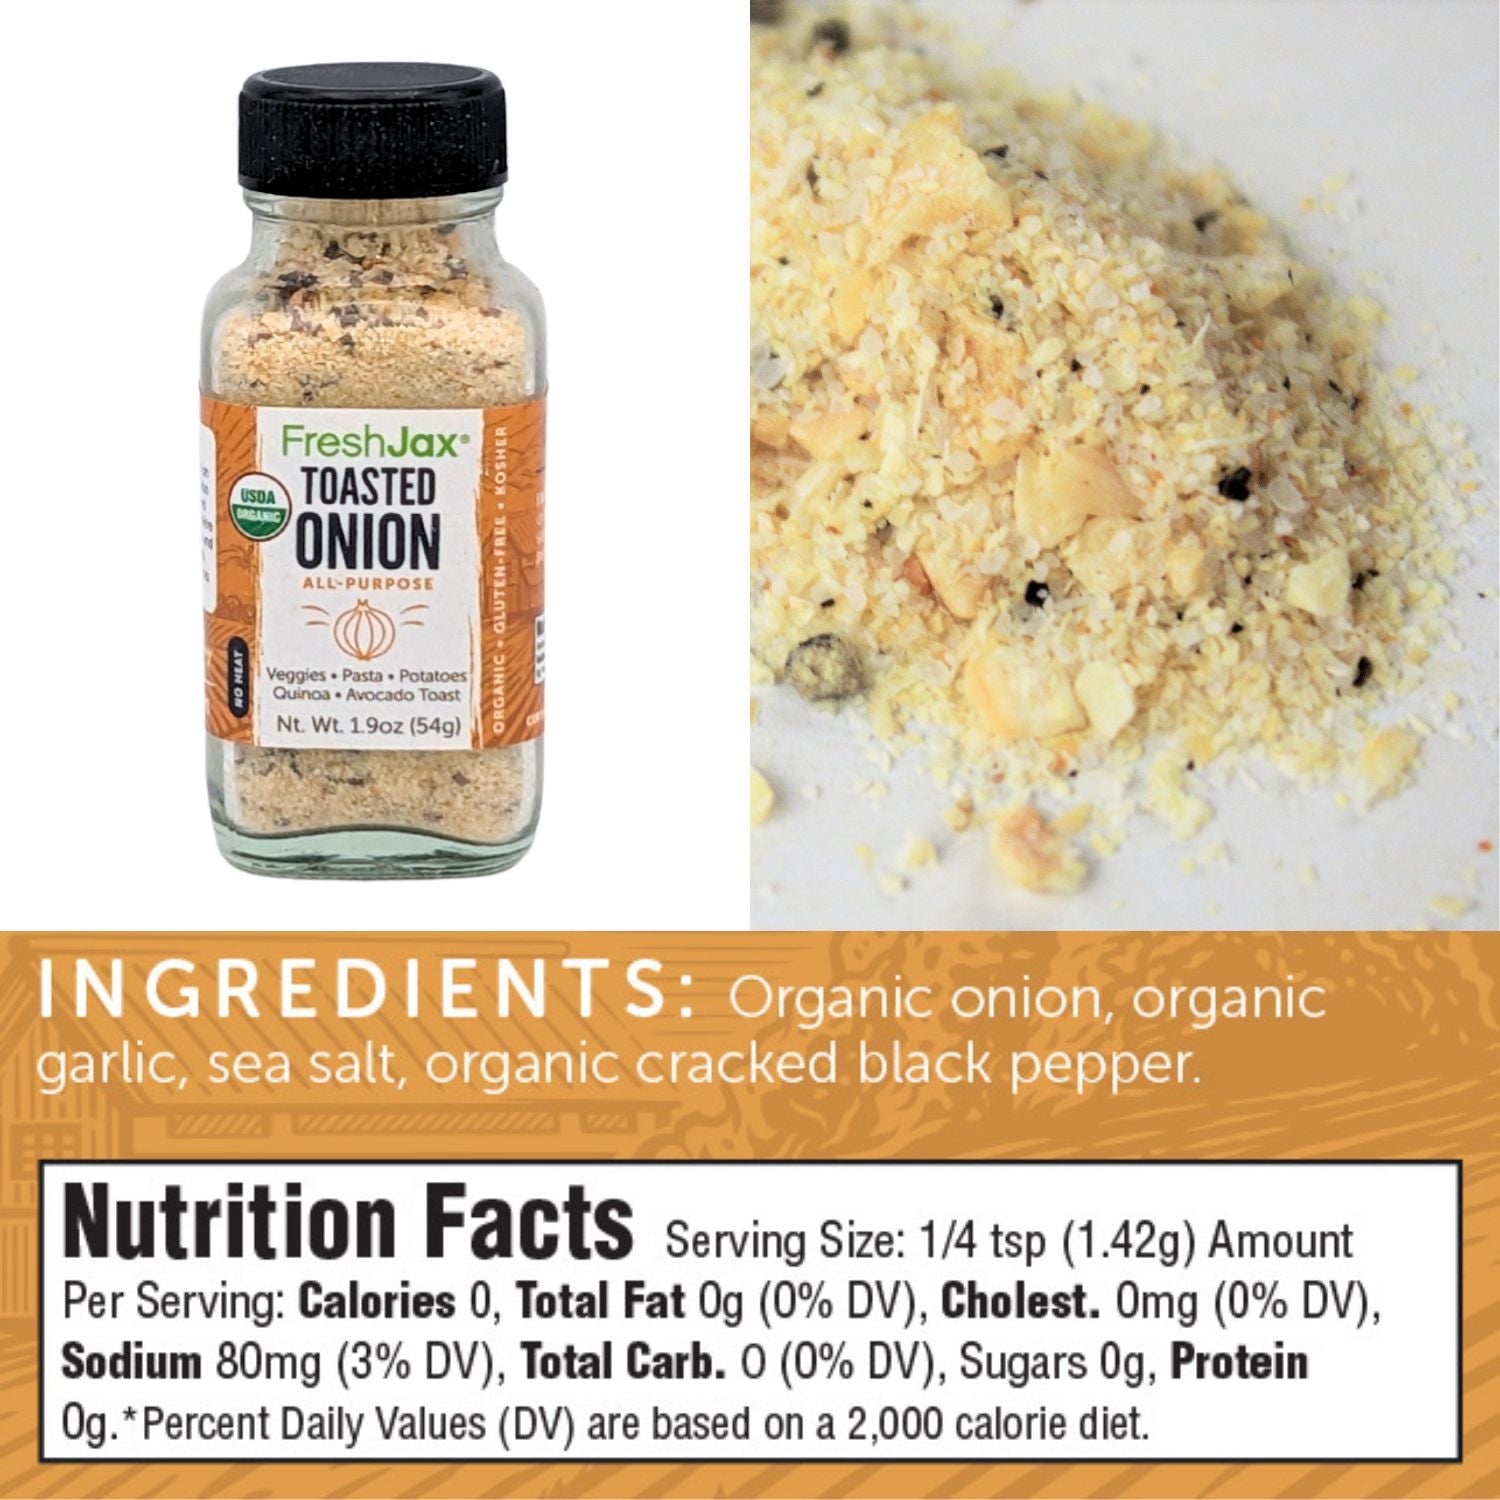 FreshJax Toasted Onion Seasoning Blend Nutritional Information and Ingredients